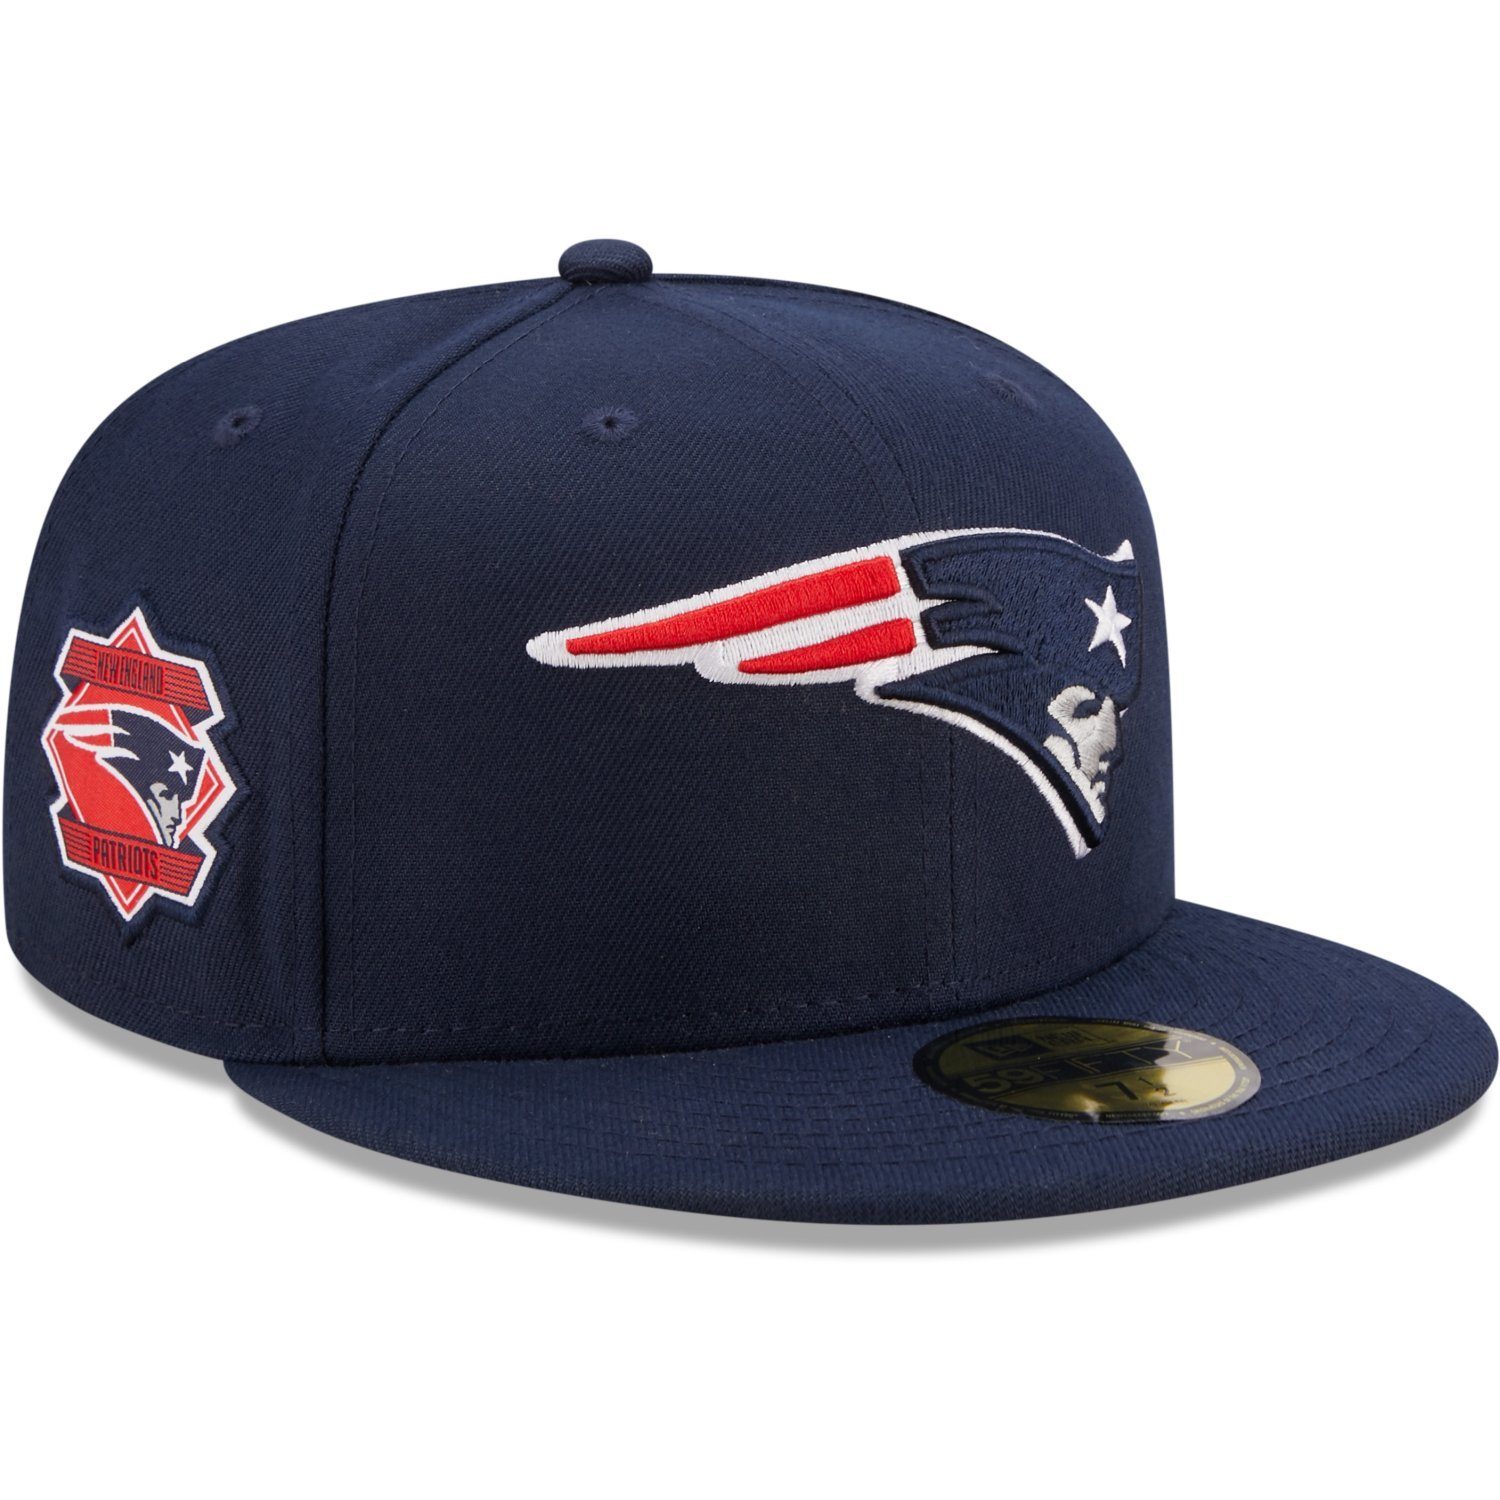 59Fifty Era New SIDE Cap Fitted New England Patriots PATCH